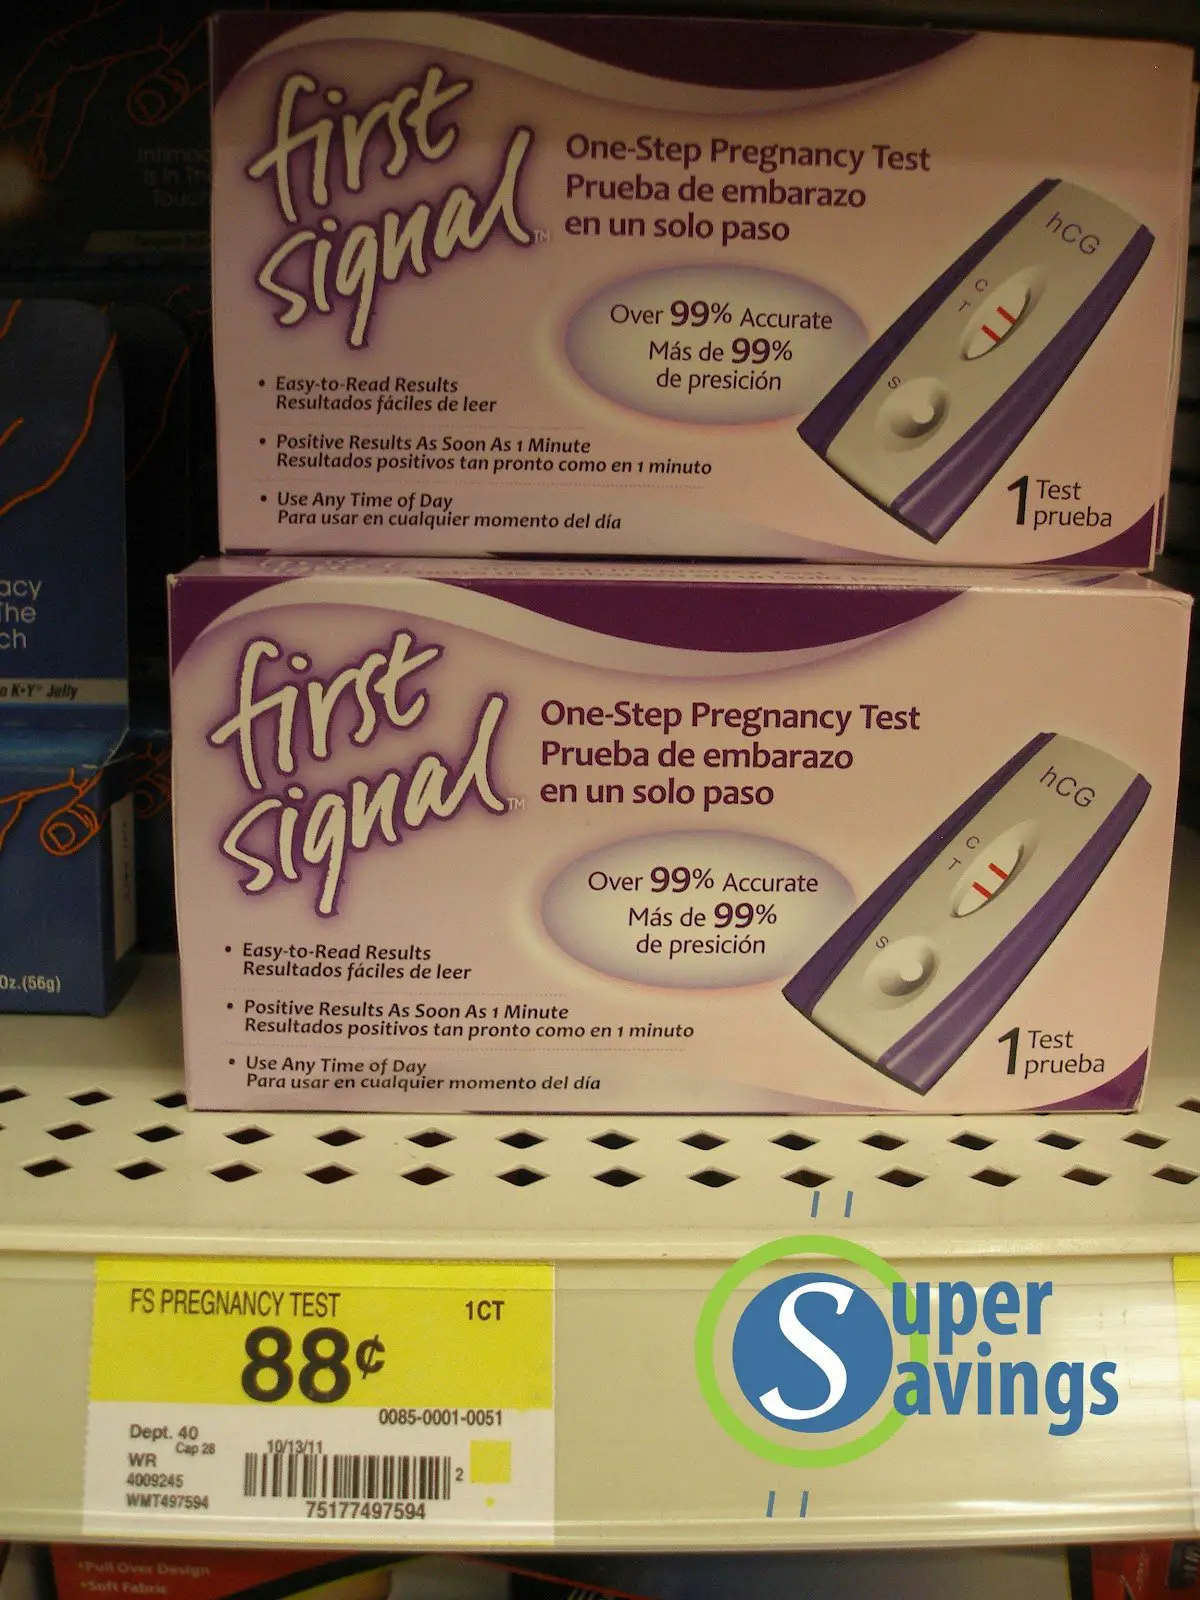 Super Savings: How to Get Cheap (but Reliable!) Pregnancy Tests